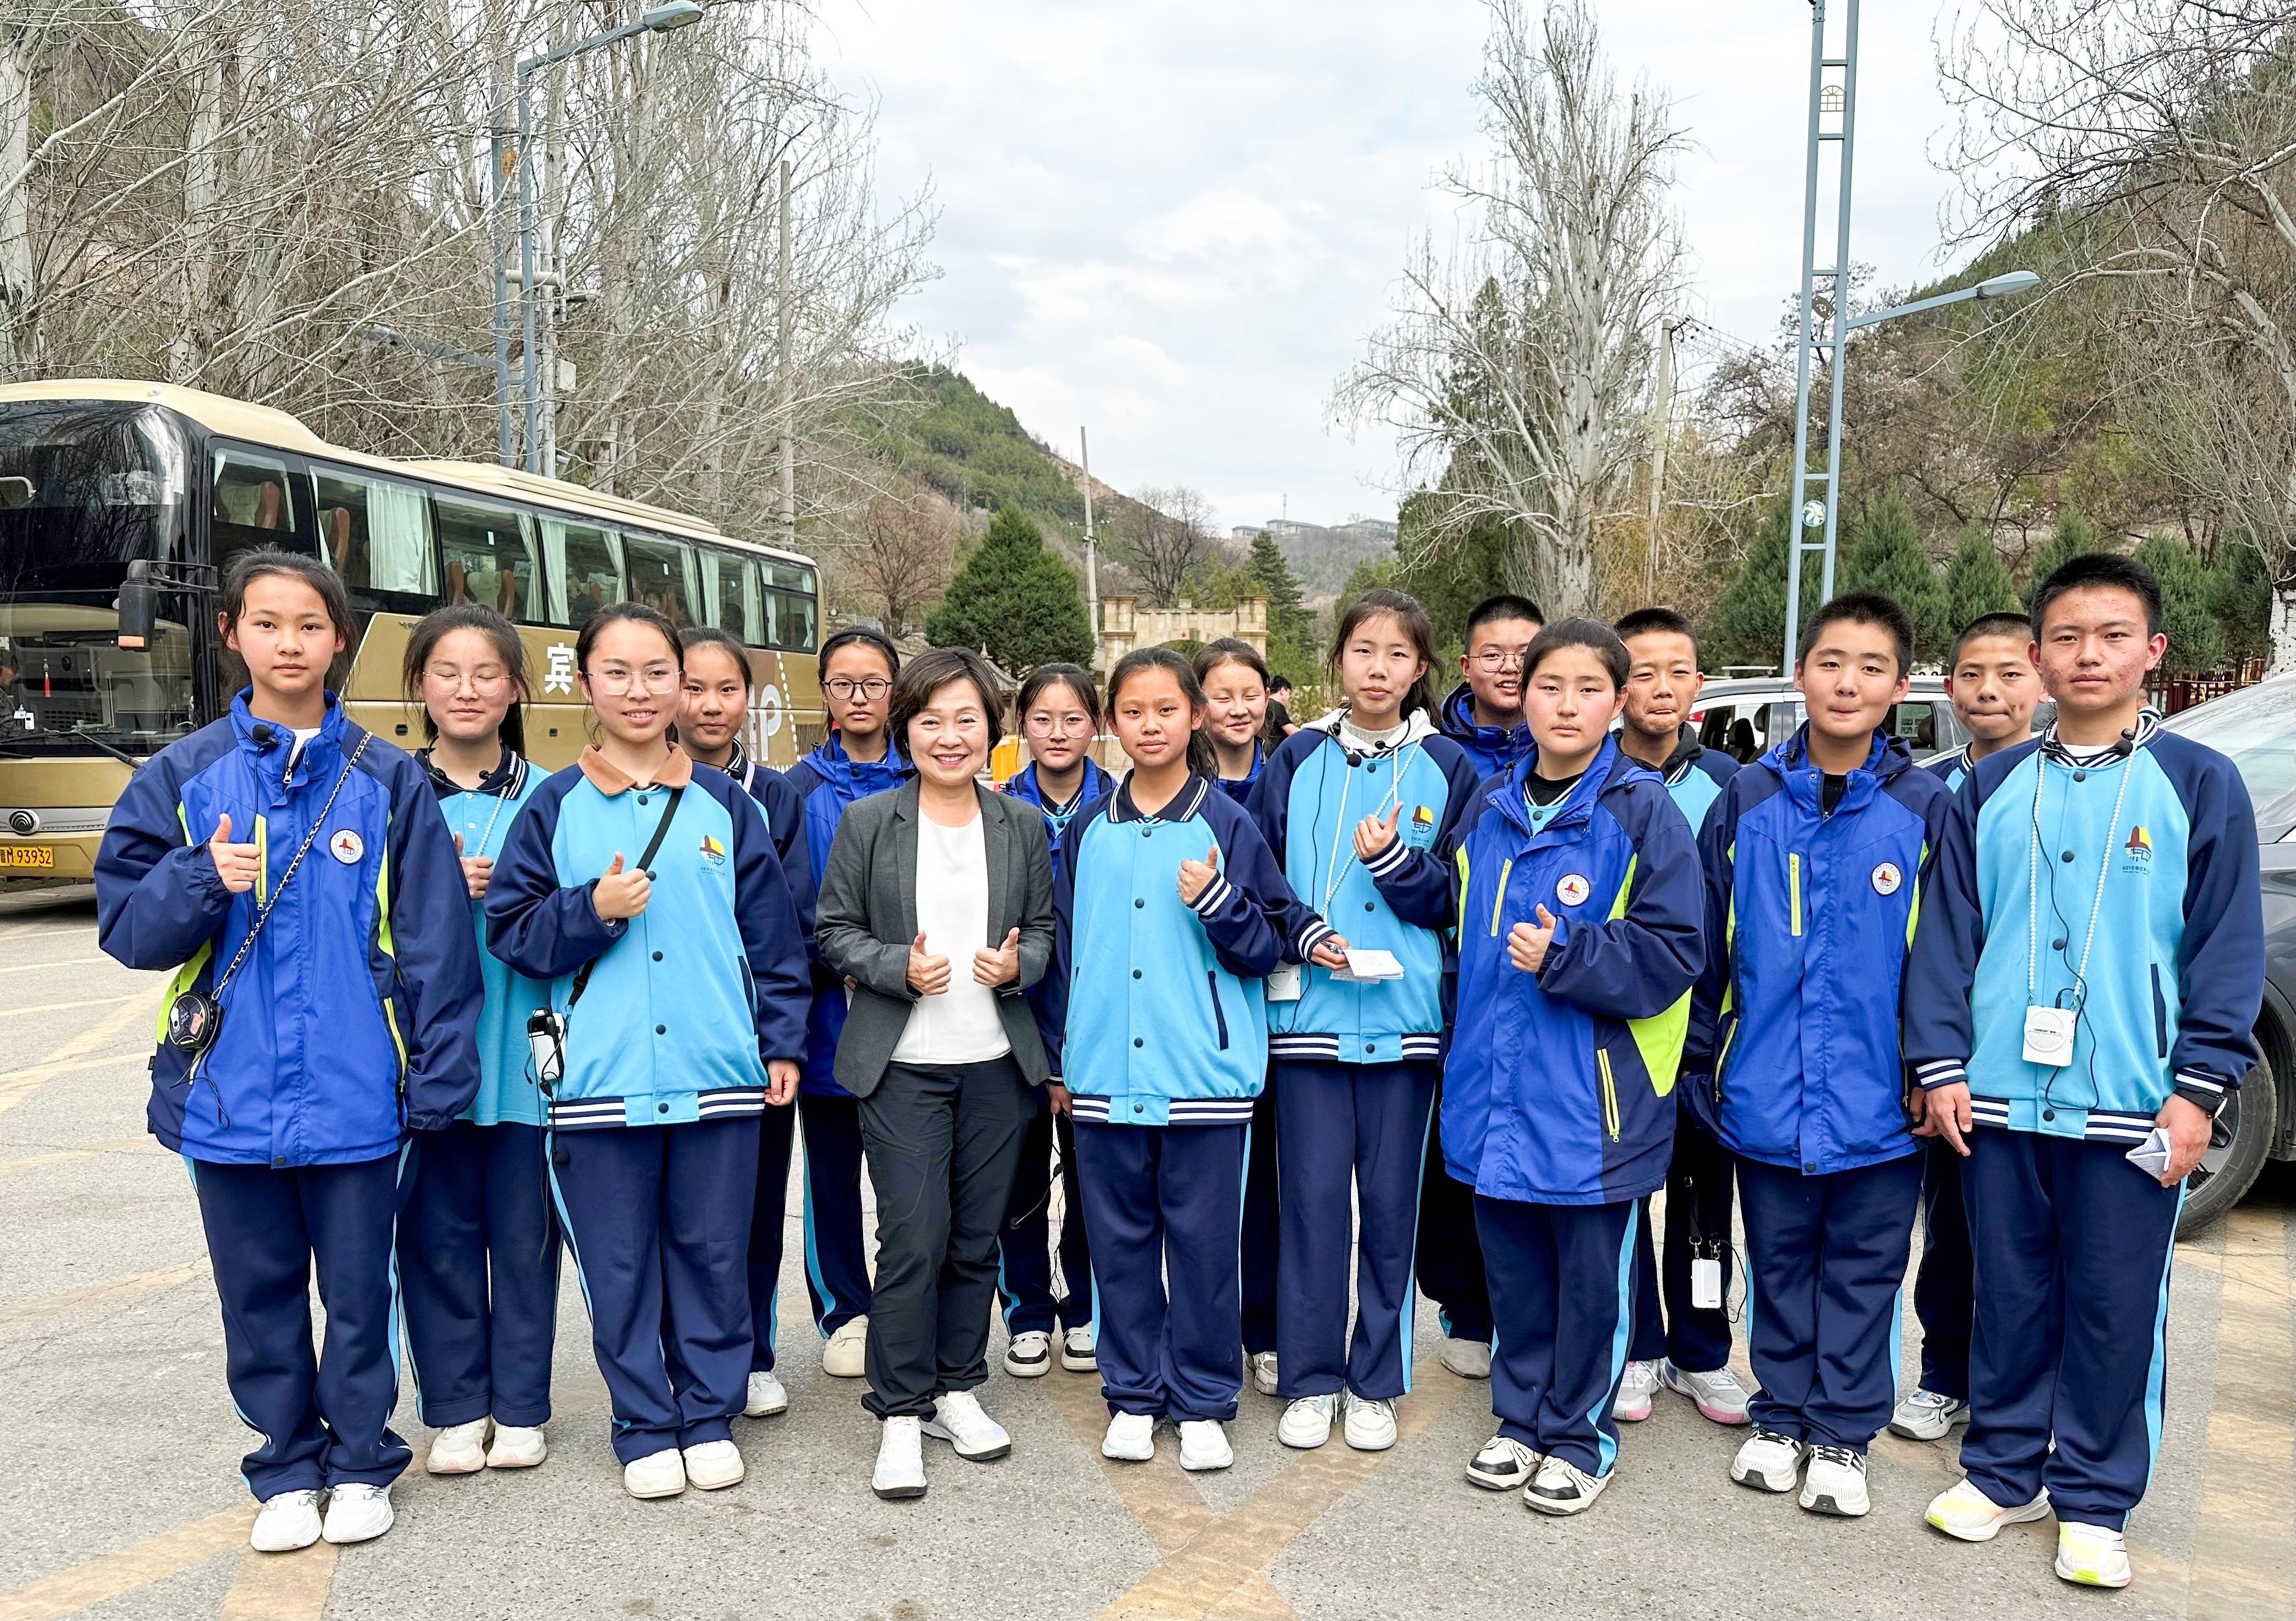 The Secretary for Education, Dr Choi Yuk-lin, leads a delegation of Chinese history teachers to visit Yan'an today (April 1). Photo shows Dr Choi (front row, third left) visits the Yangjialing Revolutionary Site in Yan'an together with the local students.